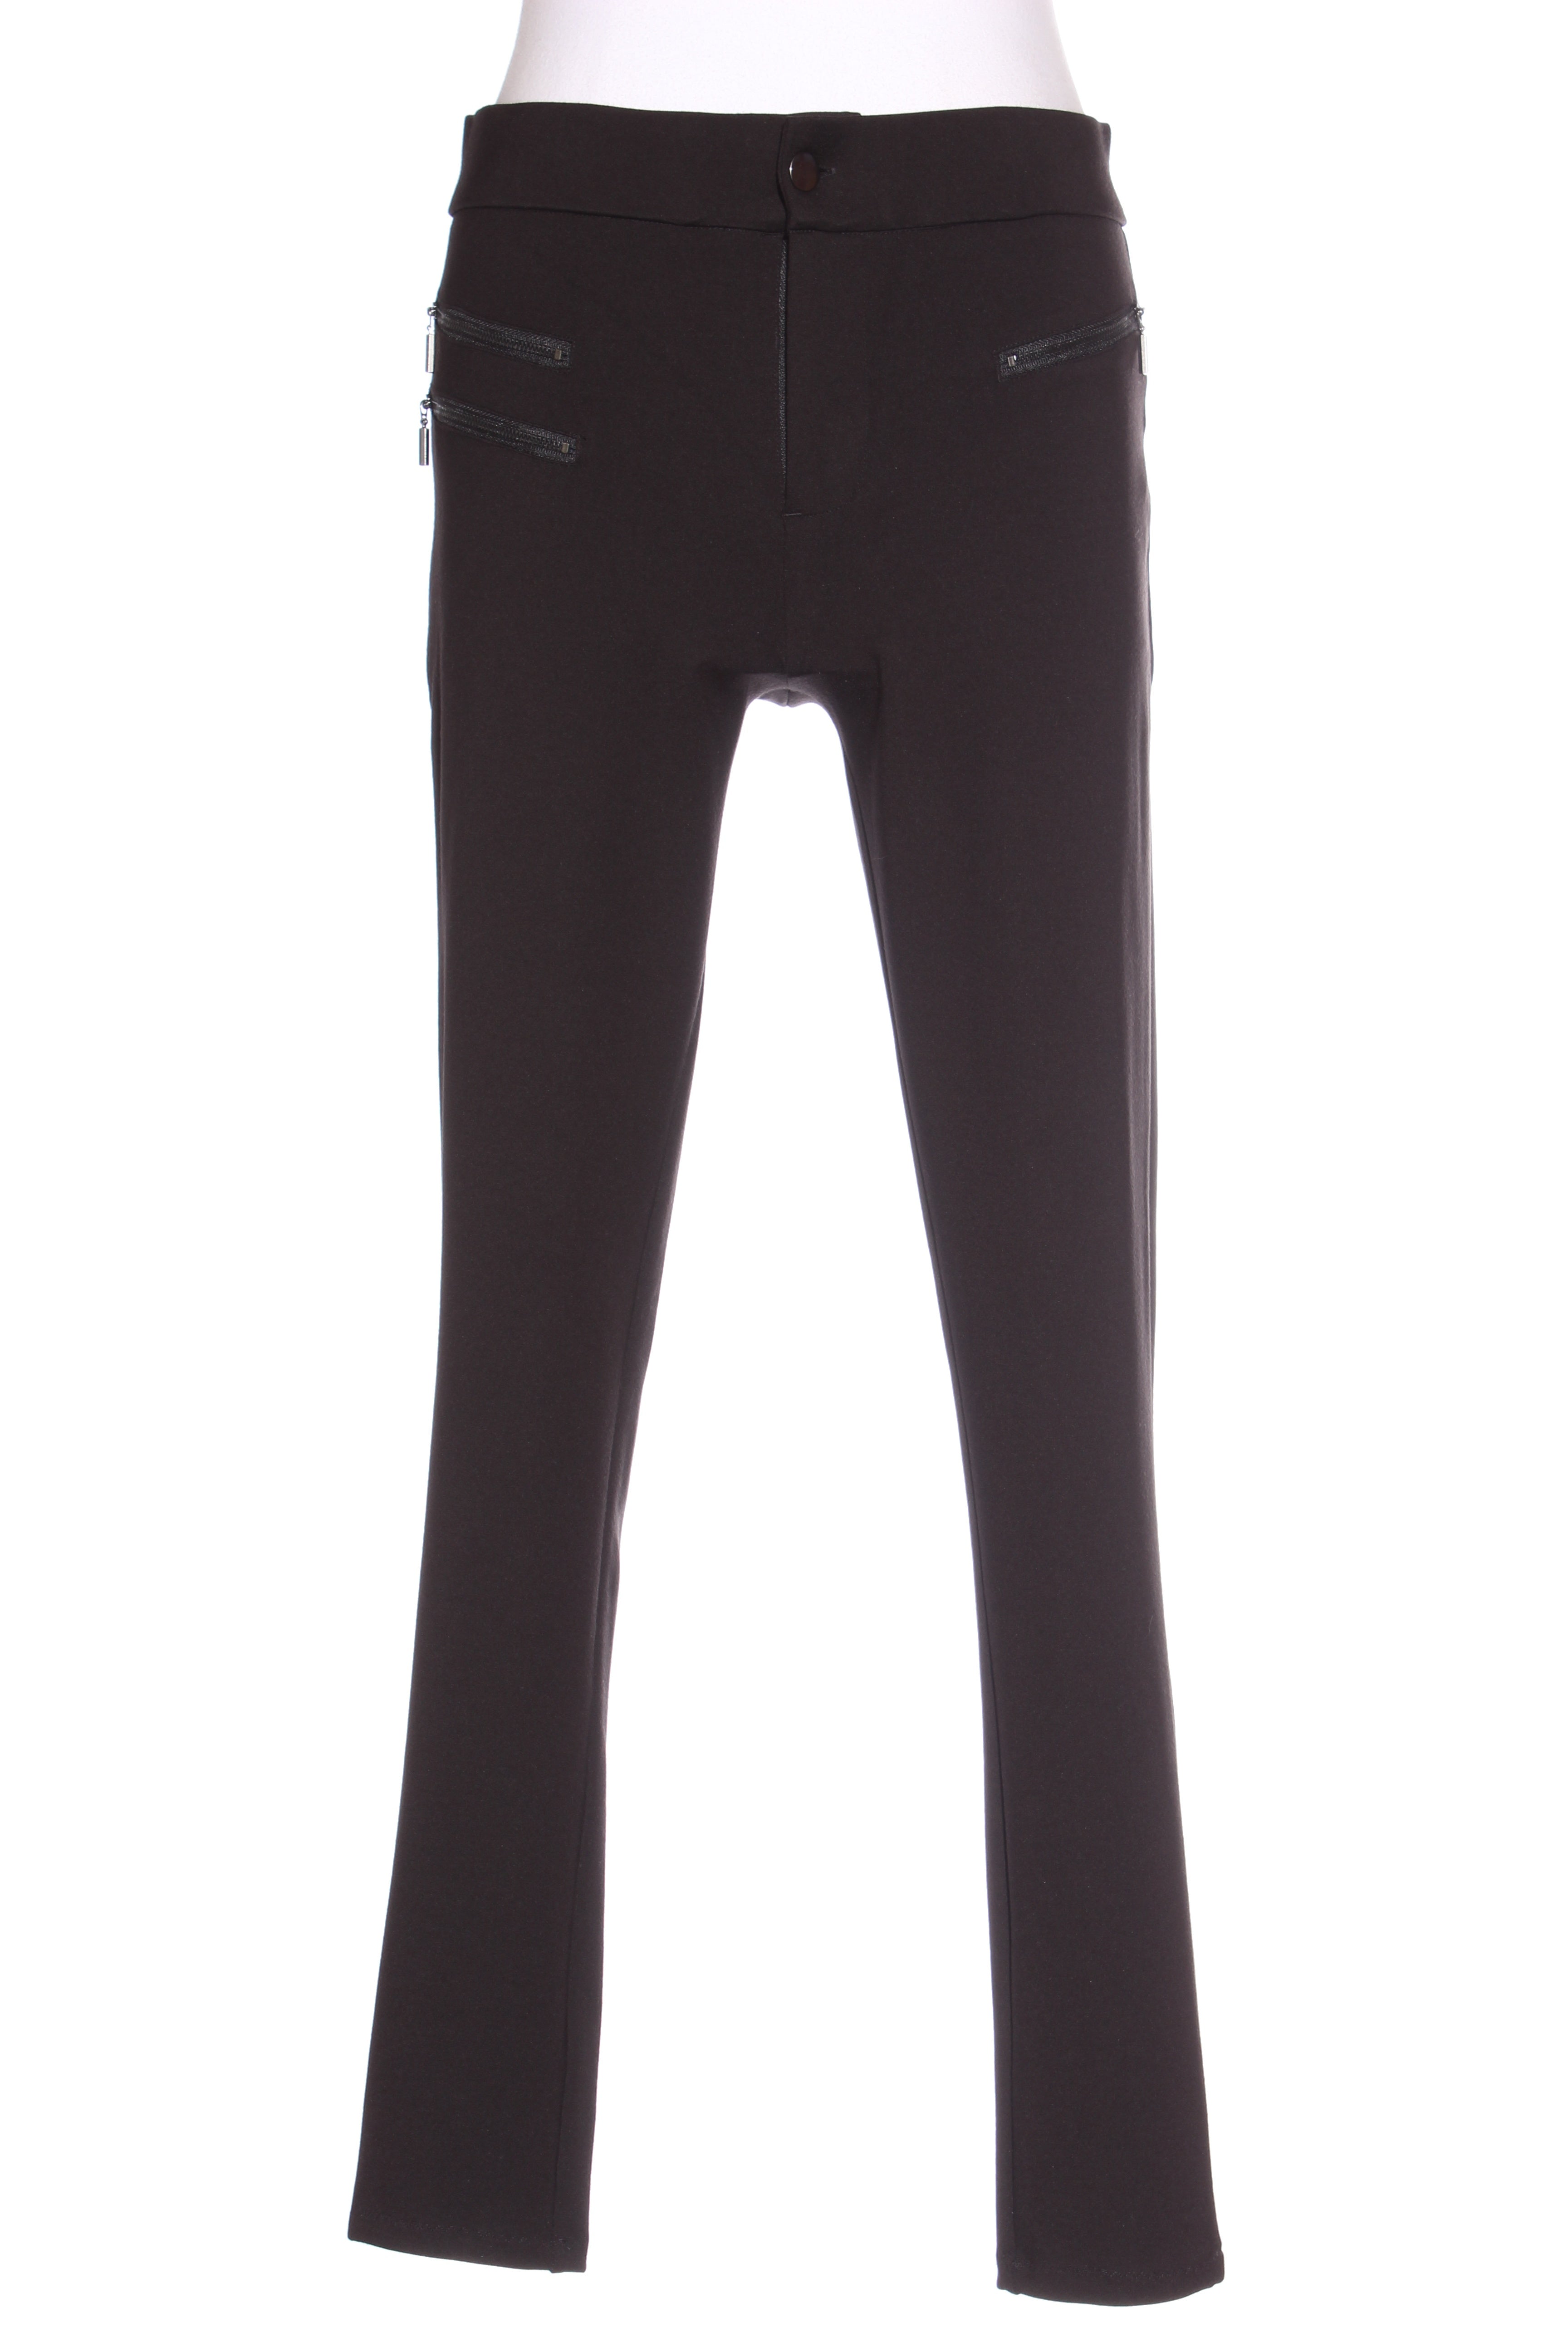 MAX - Zip detail ponte pant! 12, Recycle Style